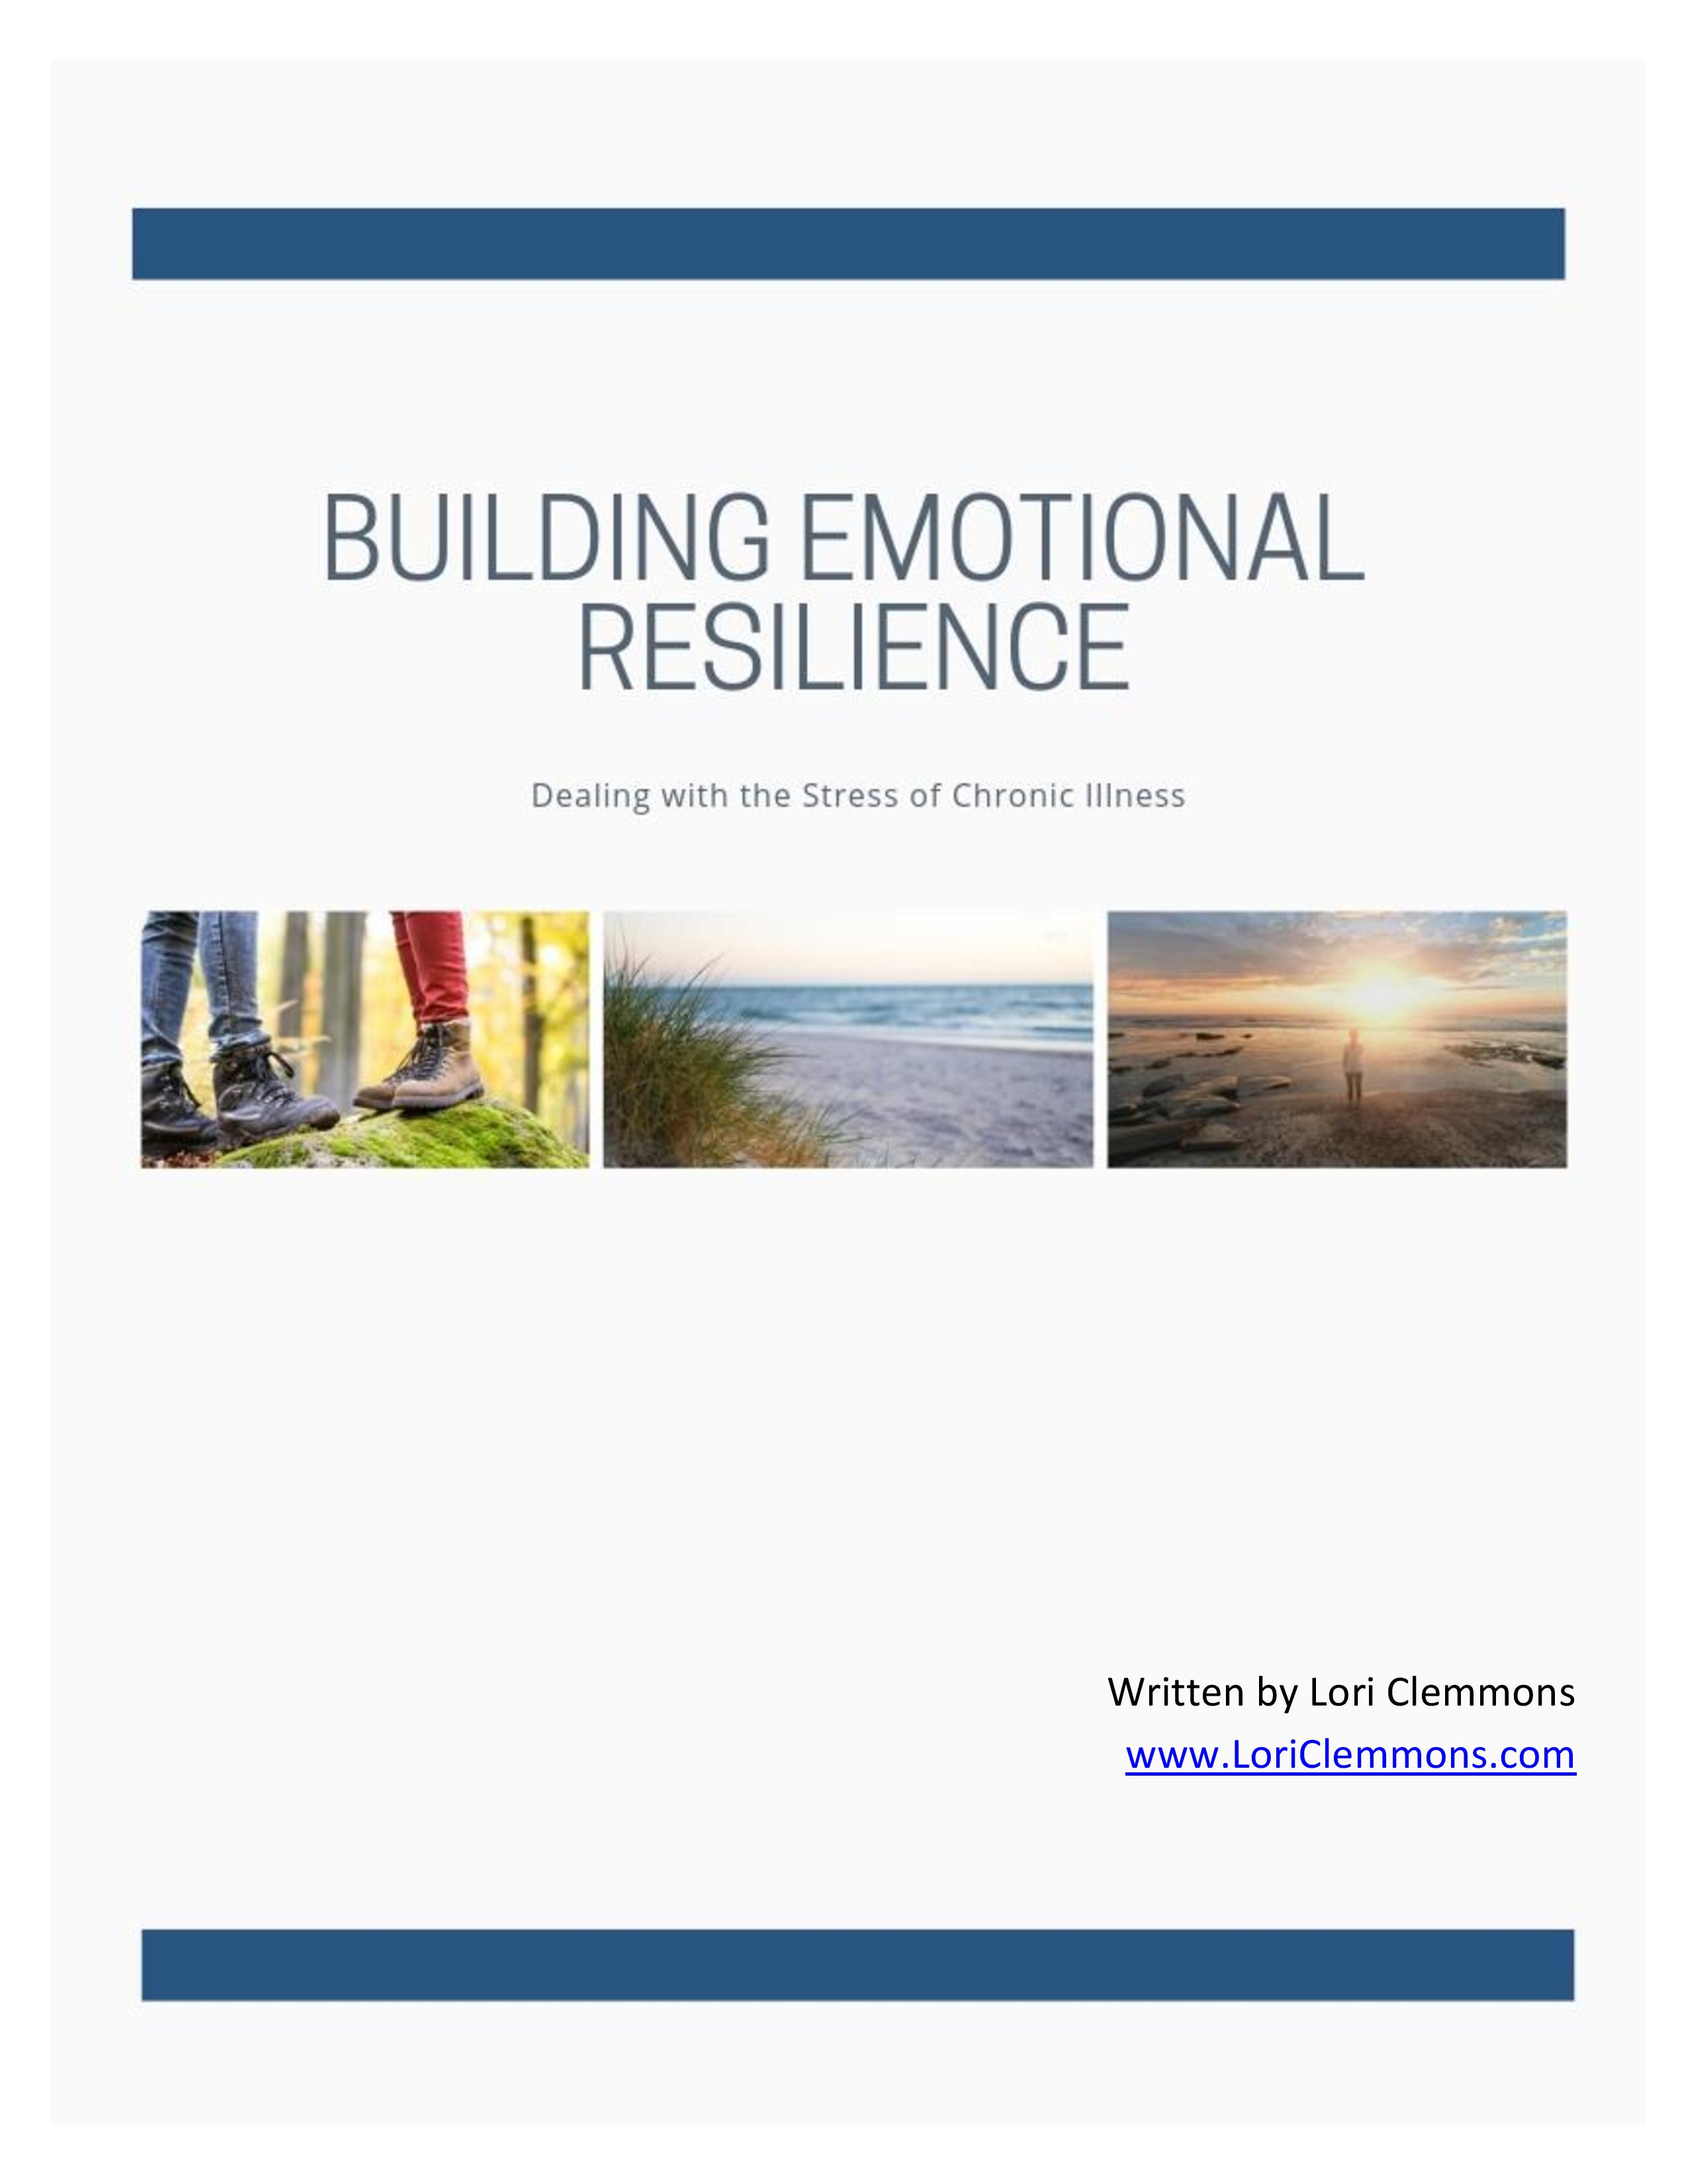 Building Emotional Resilience